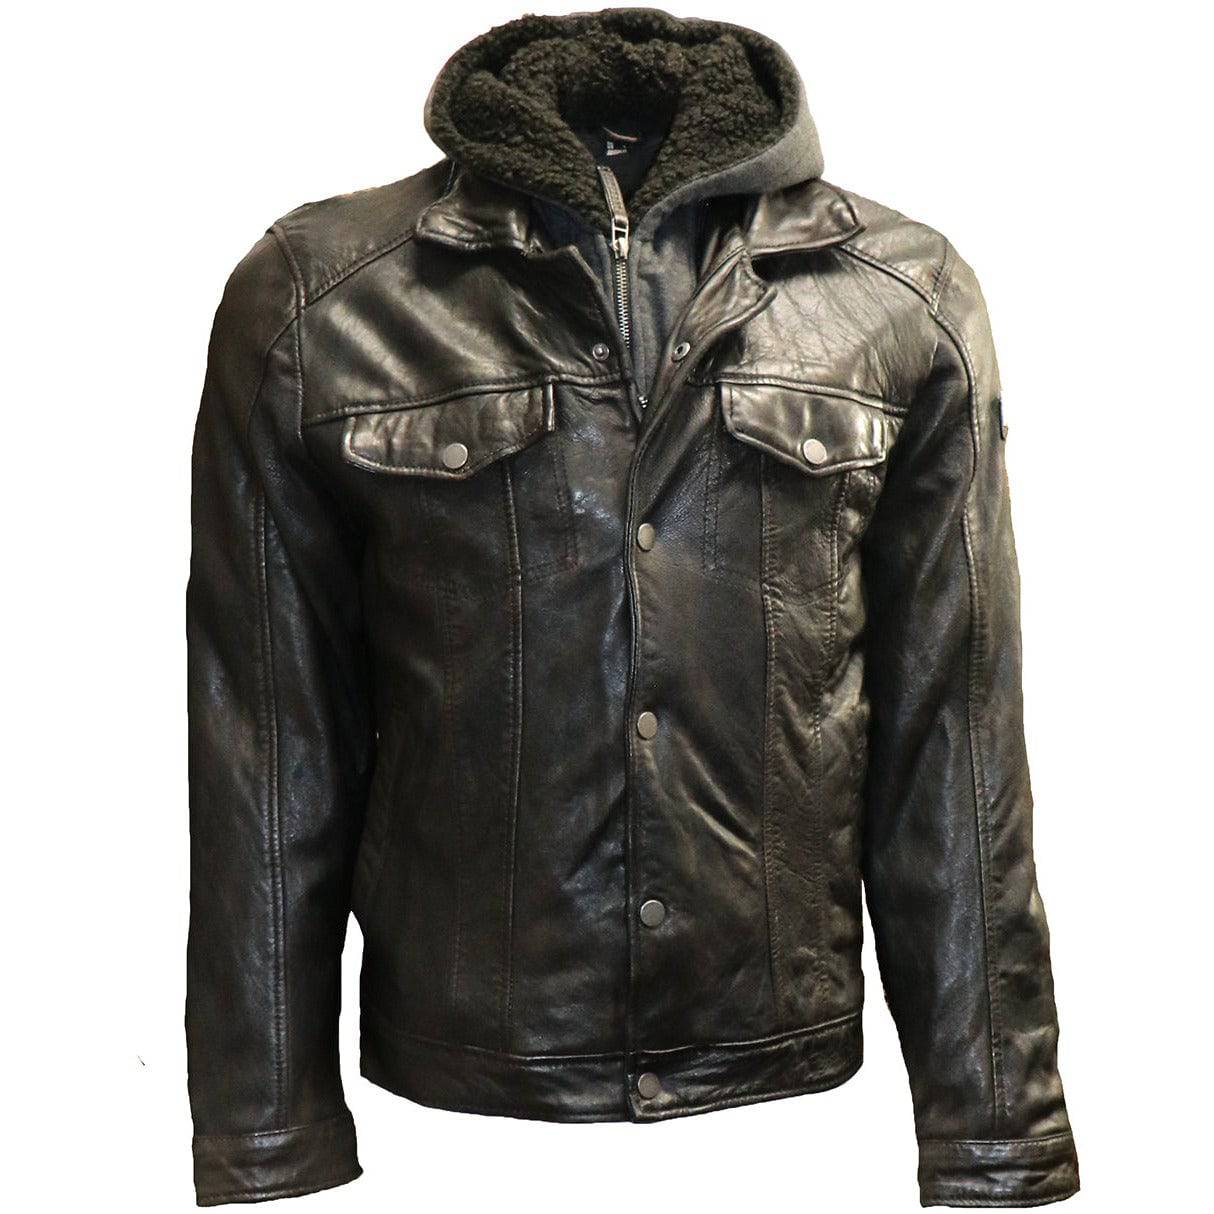 Mauritius Men's Trucker Leather Jacket with Hood